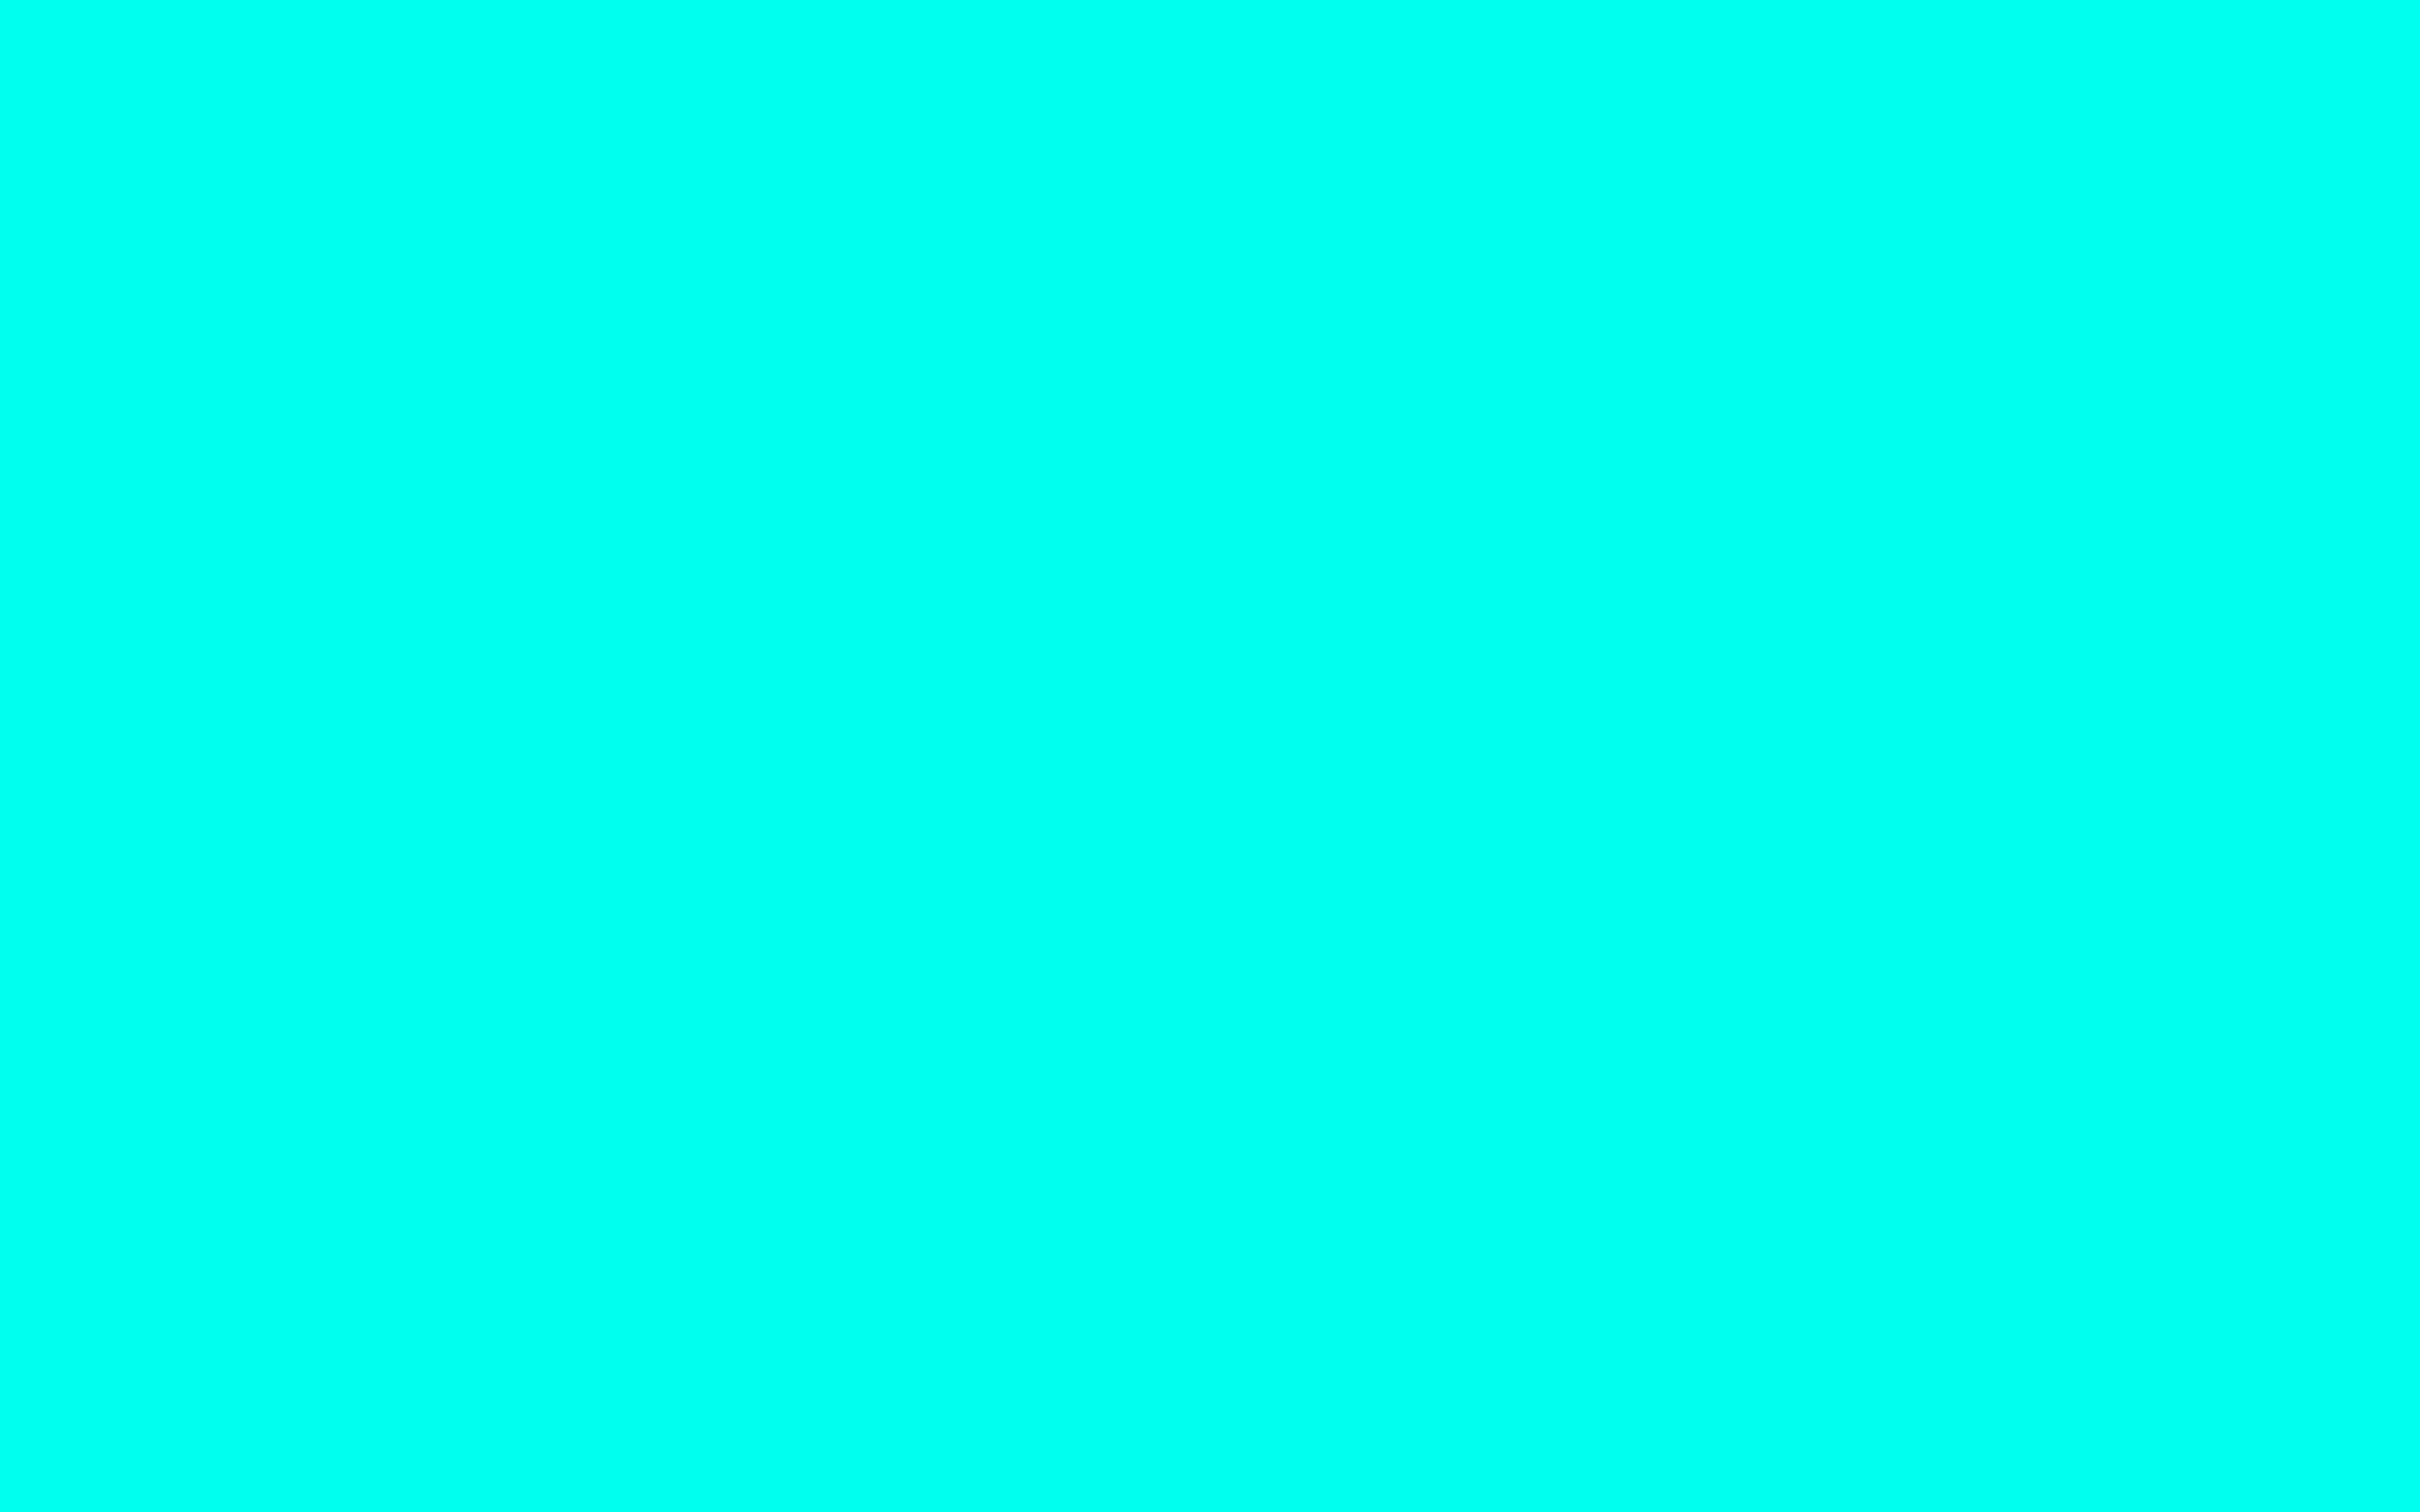 A green background with some white text - Aqua